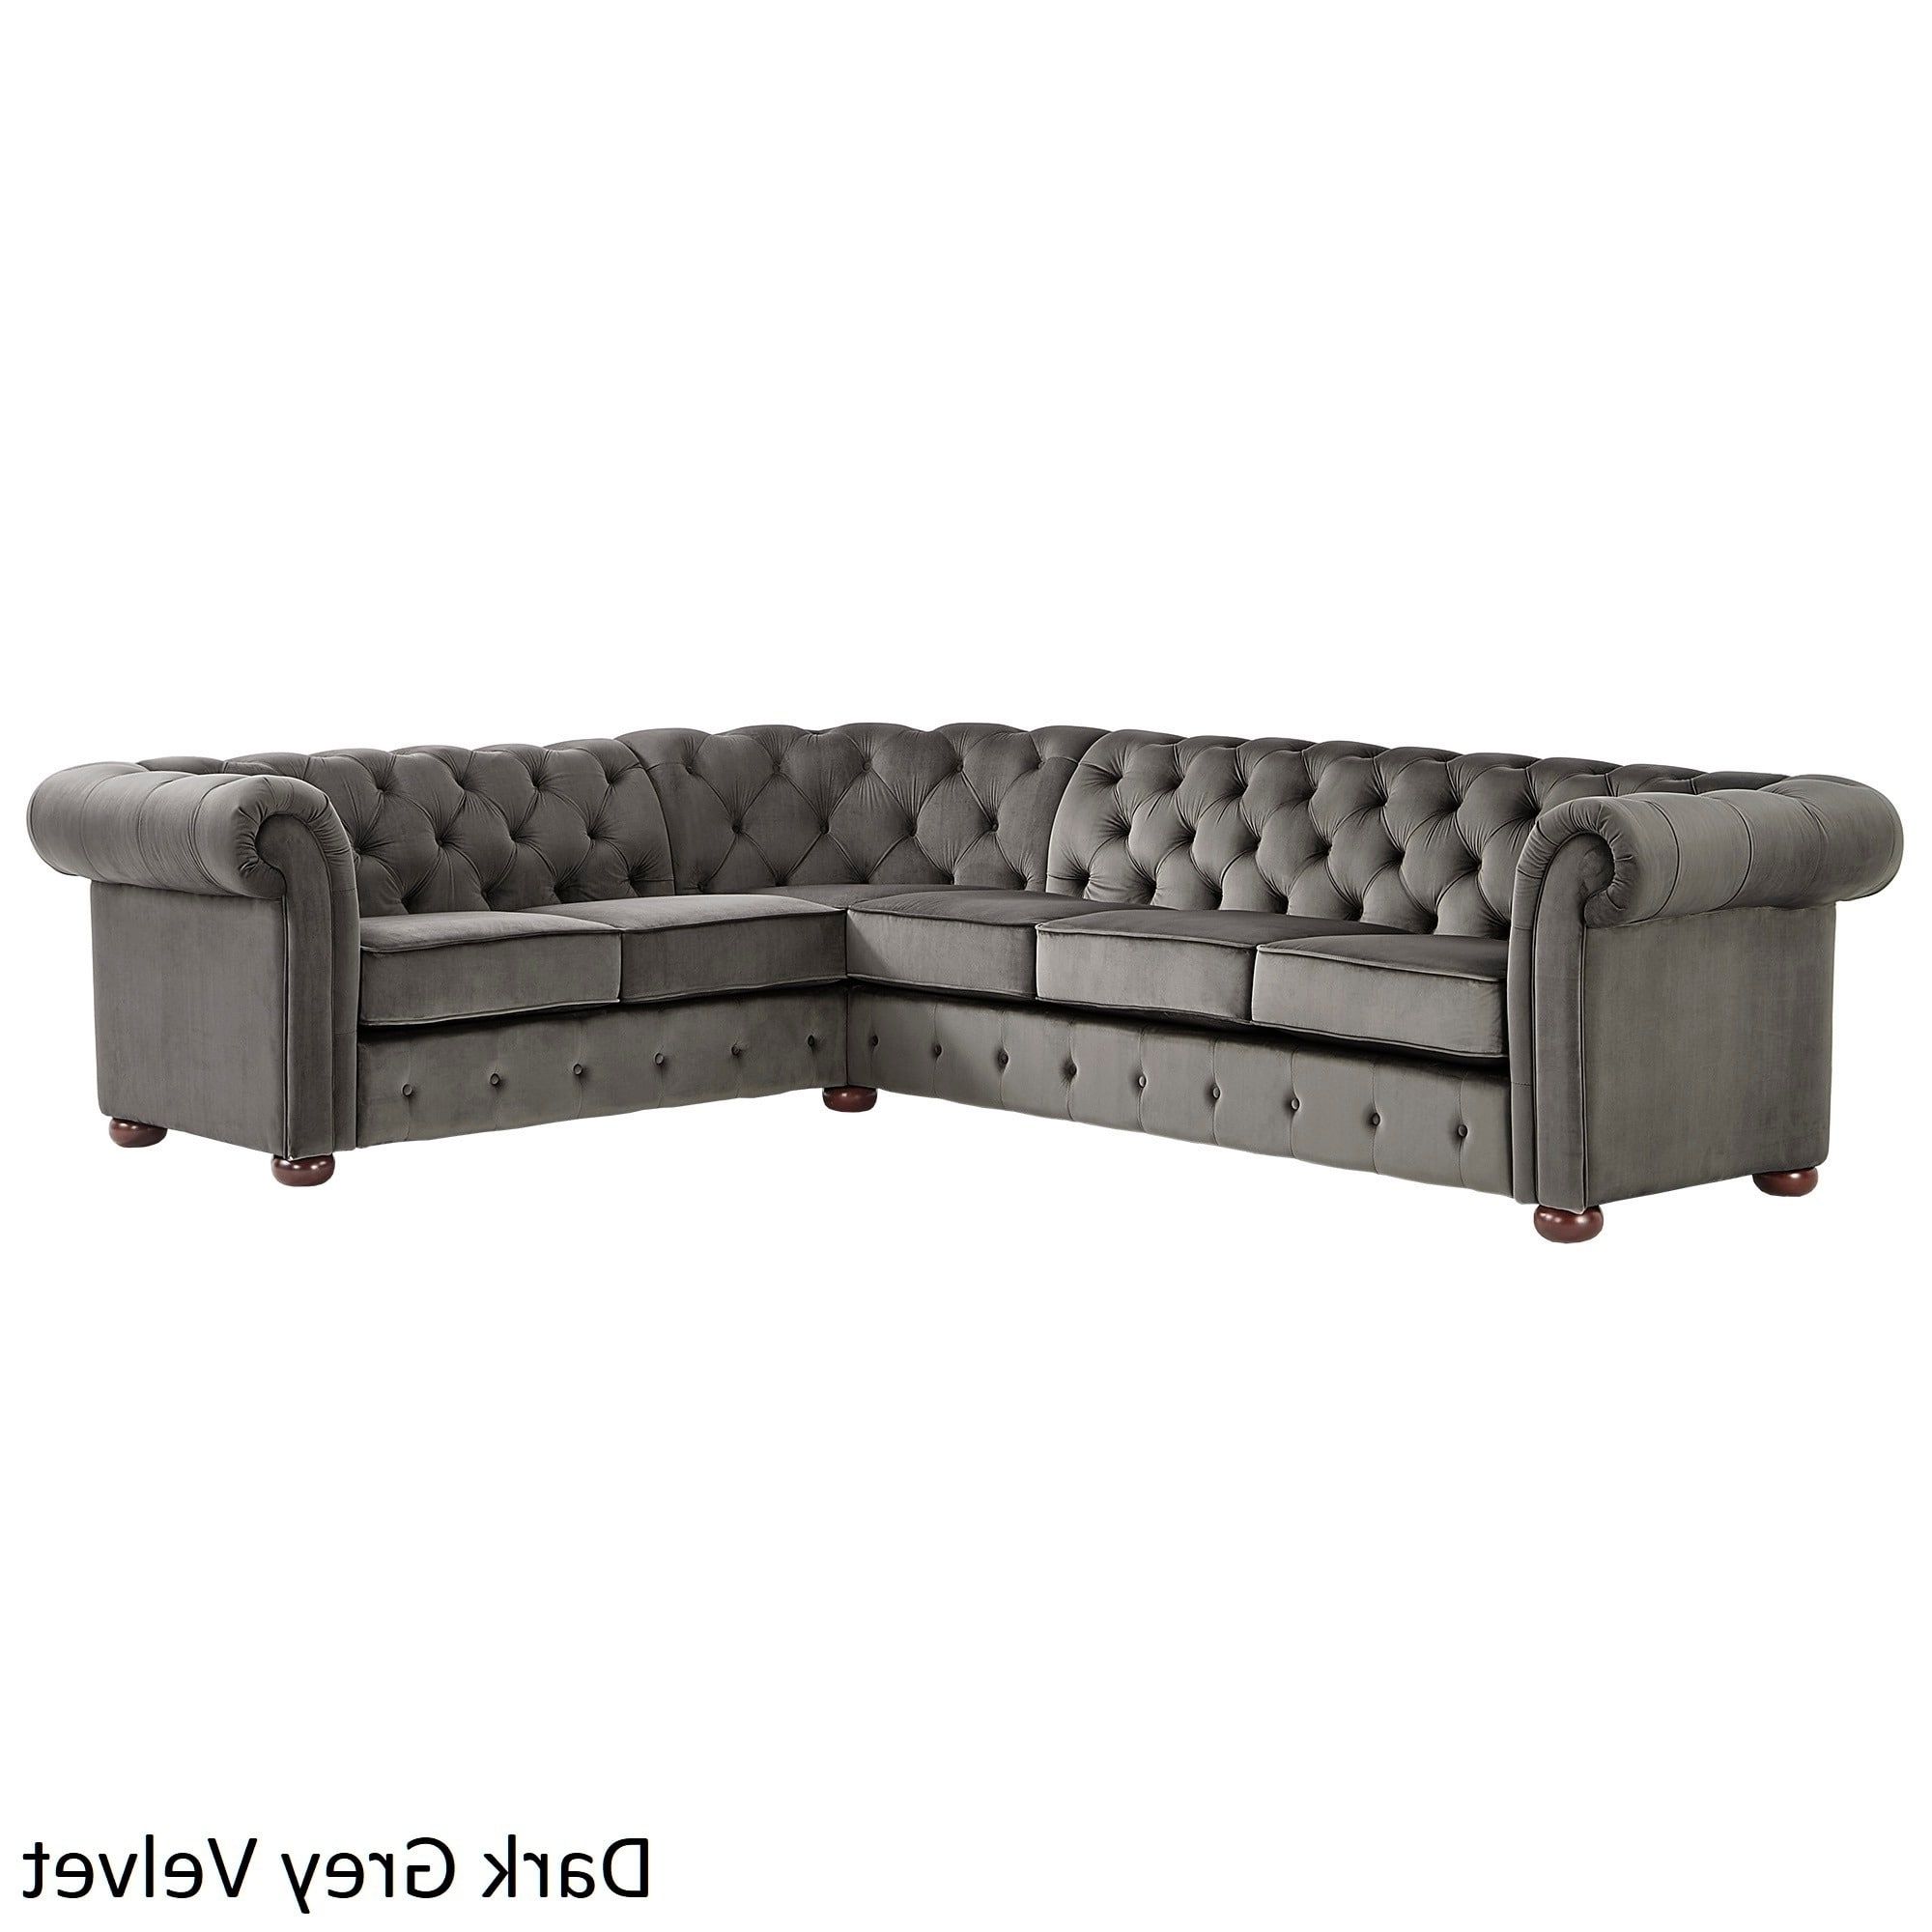 Grey Sofas With Chaise In Recent Sofa : Magnificentterfield Sectional Sofa Photos Ideas Affordable (View 14 of 15)